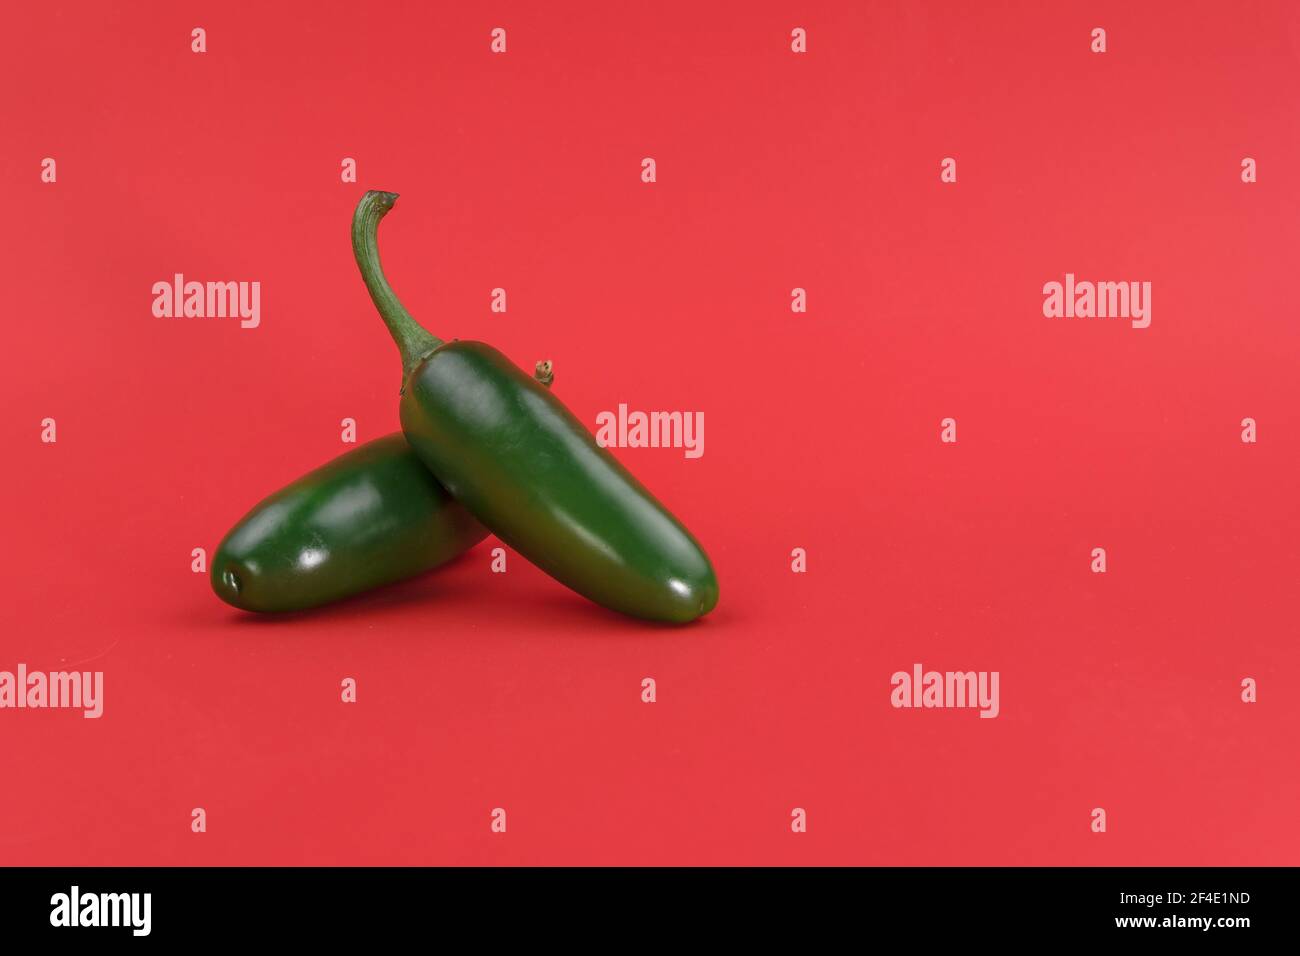 Ripe green chili peppers on a red background, the background has room to add text Stock Photo